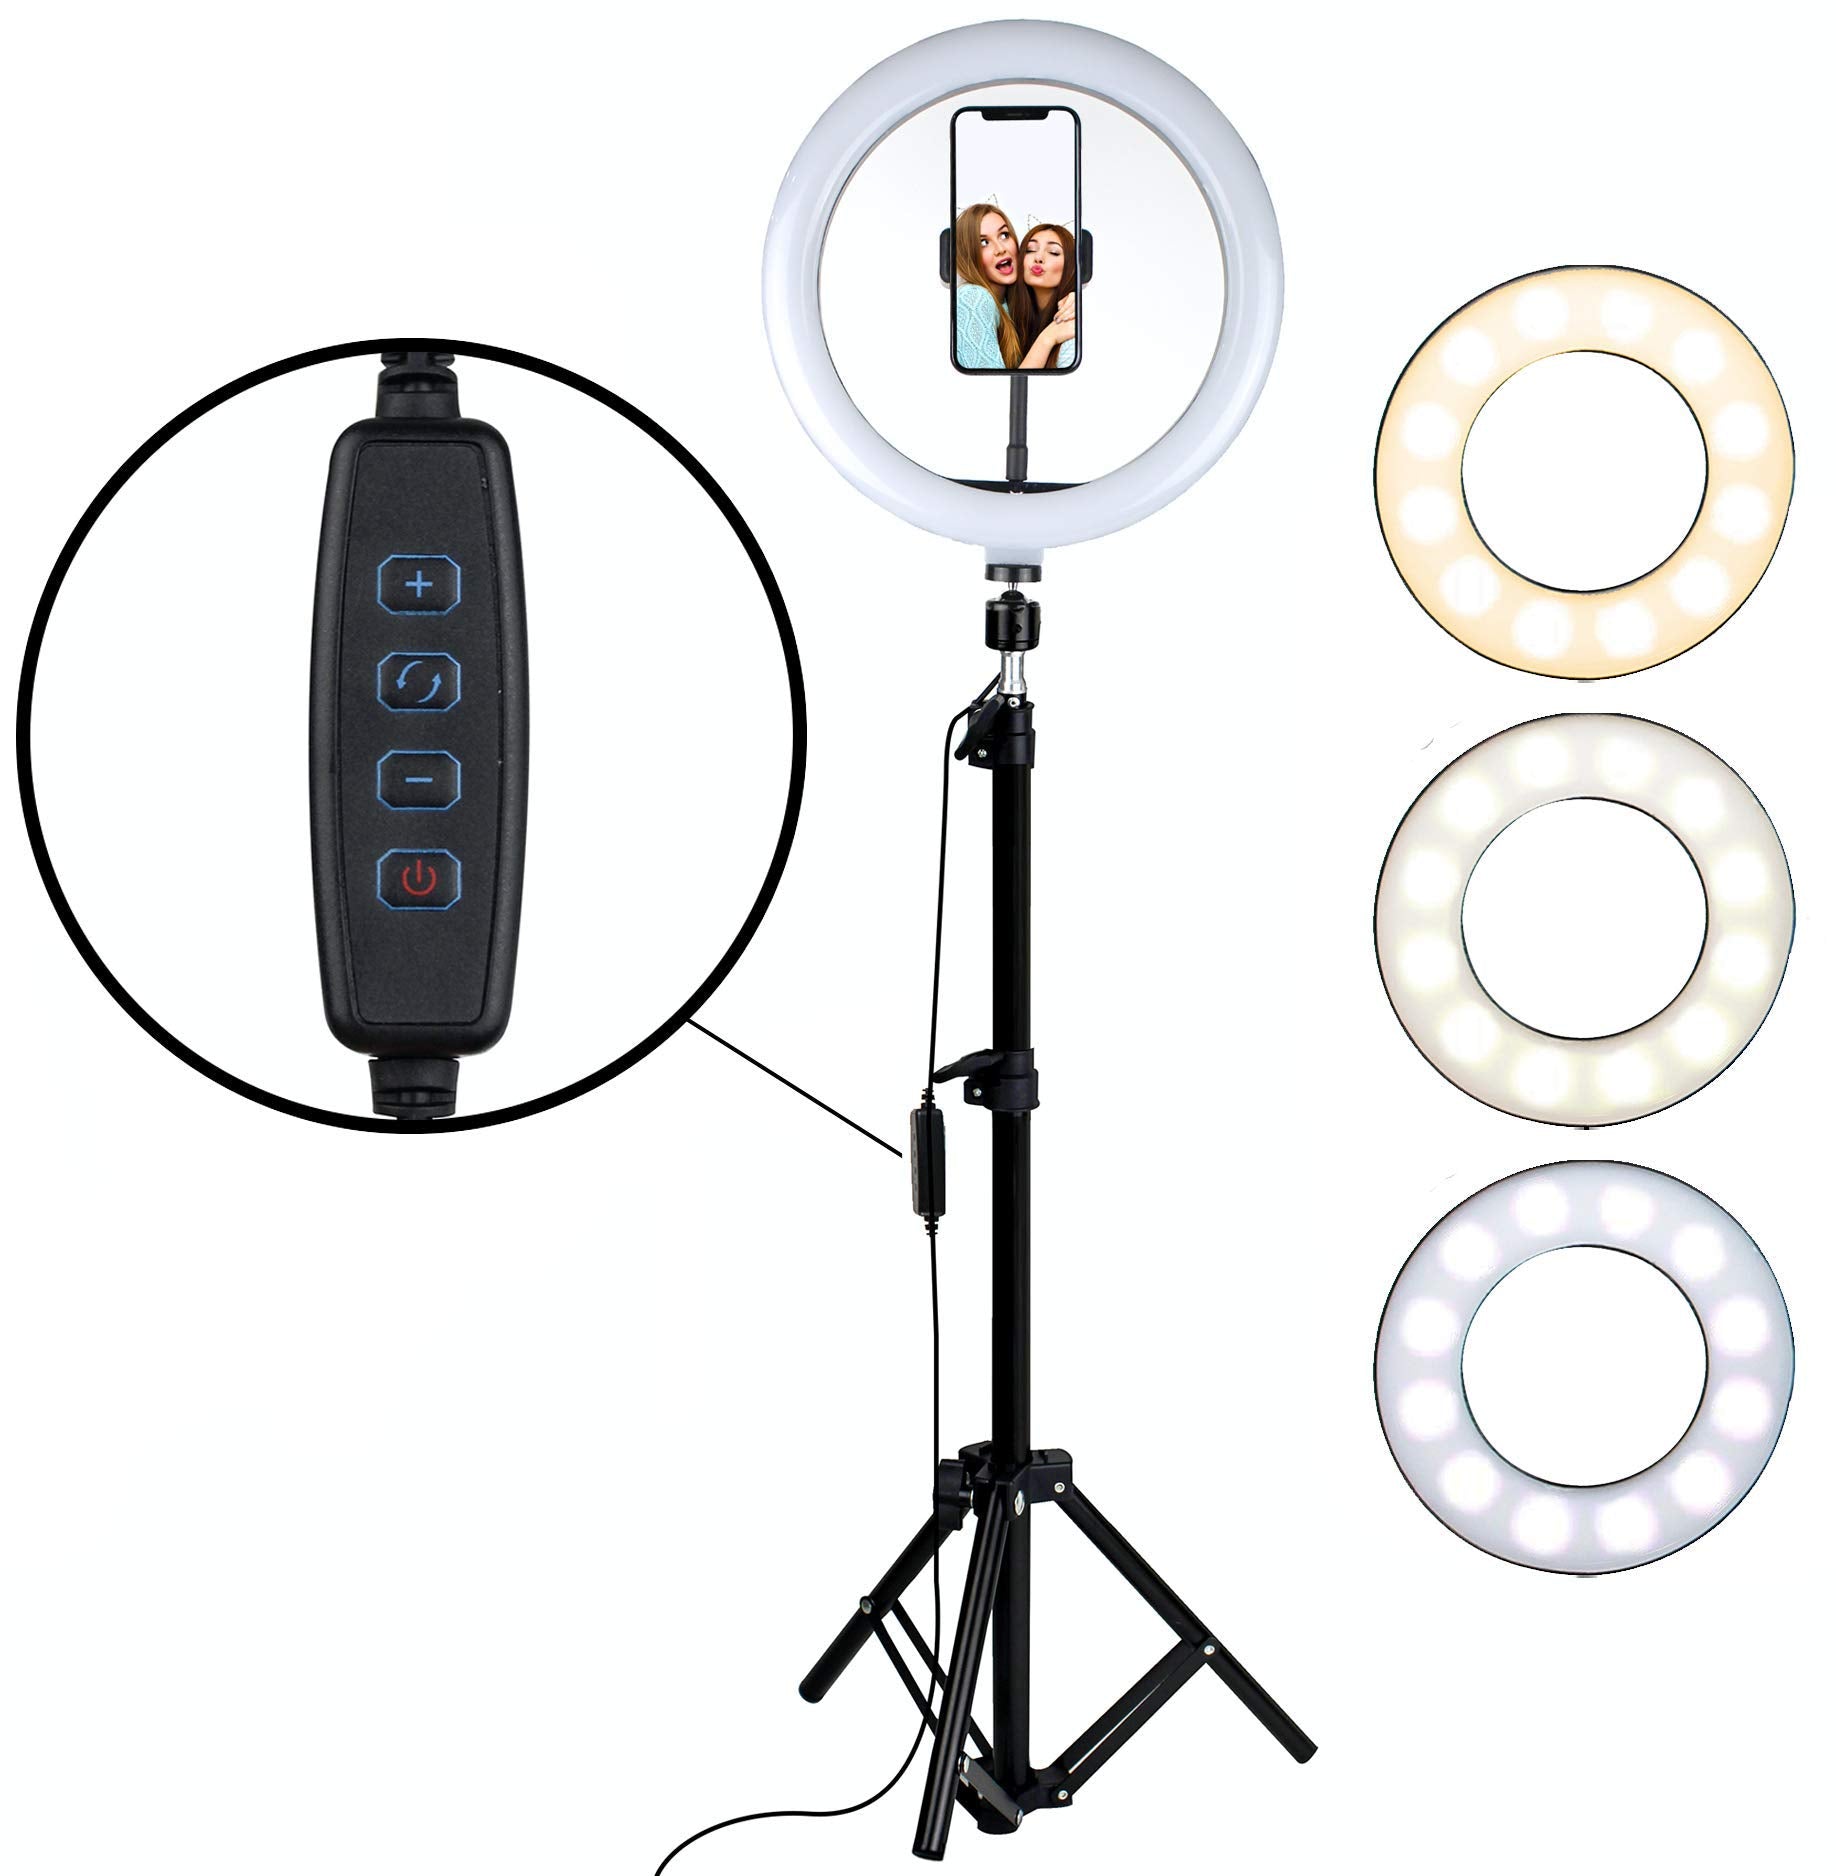 Aduro U-Stream Ring Light with Stand Tripod, 10" Selfie Ring Light for iPhone with Tripod & Phone Holder for Live Video Selfie Recording Kit  - Like New